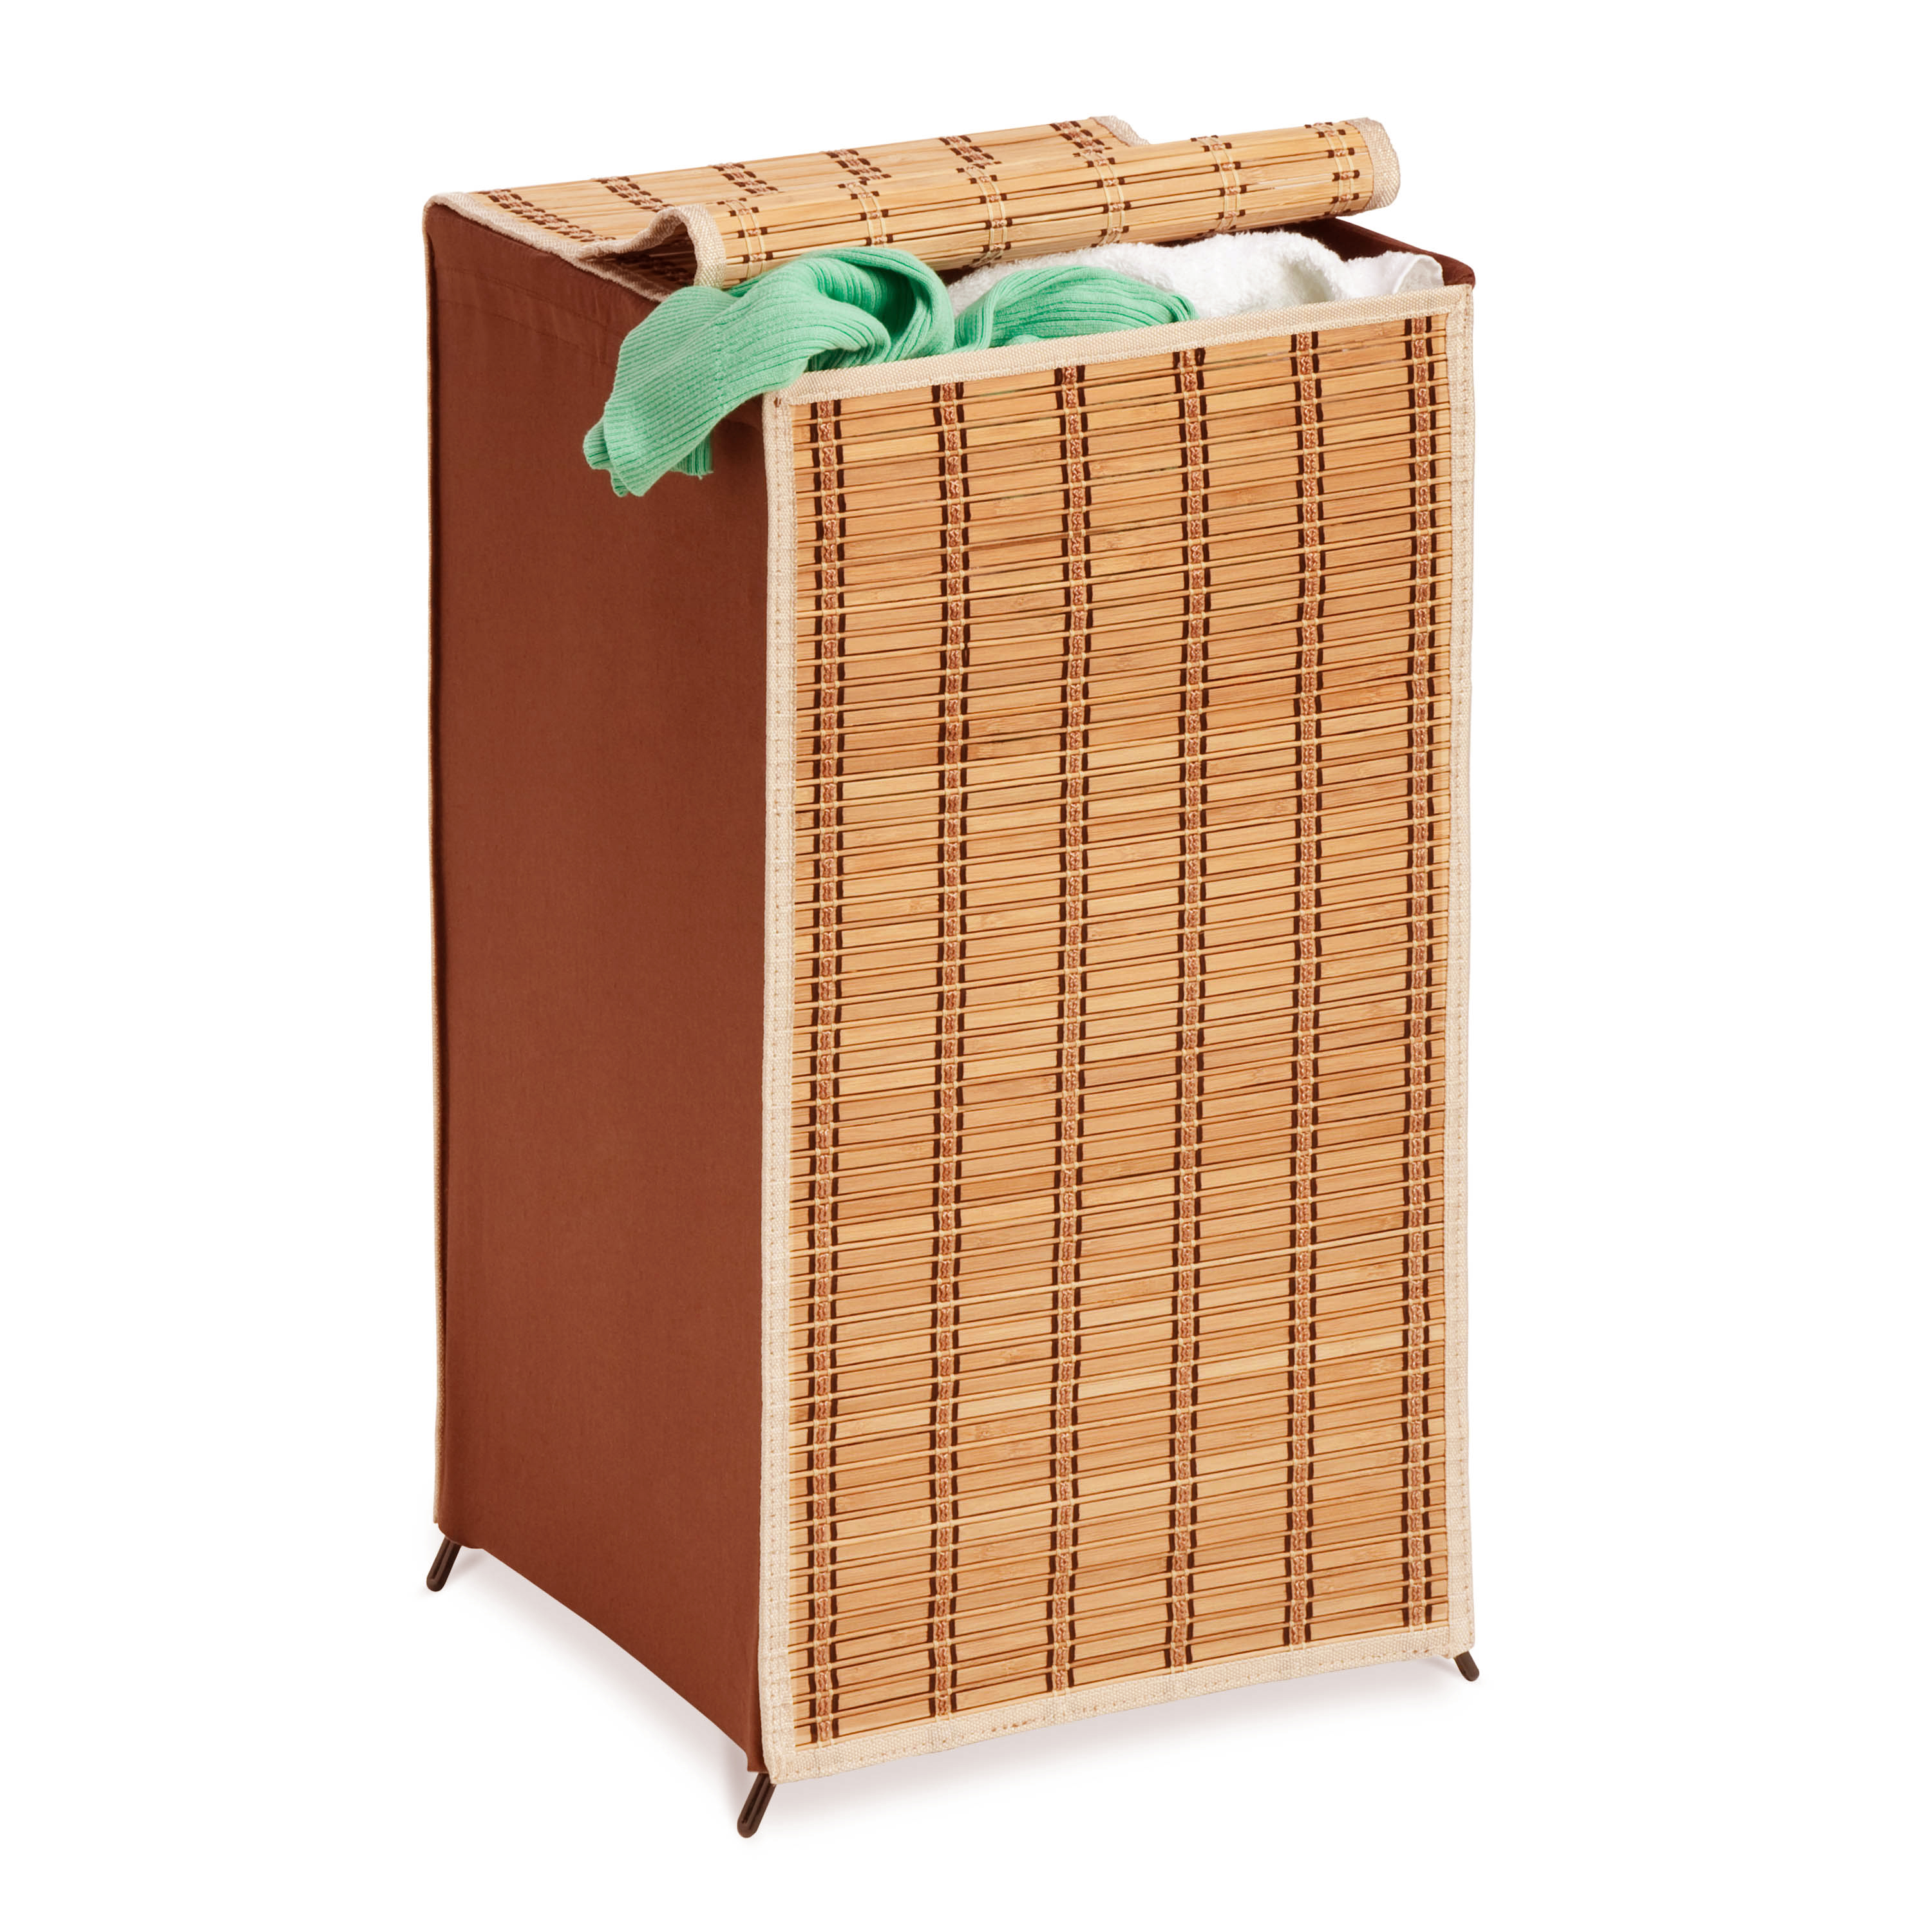 Honey-Can-Do Bamboo Wicker Laundry Hamper with Lid, Natural - image 3 of 5